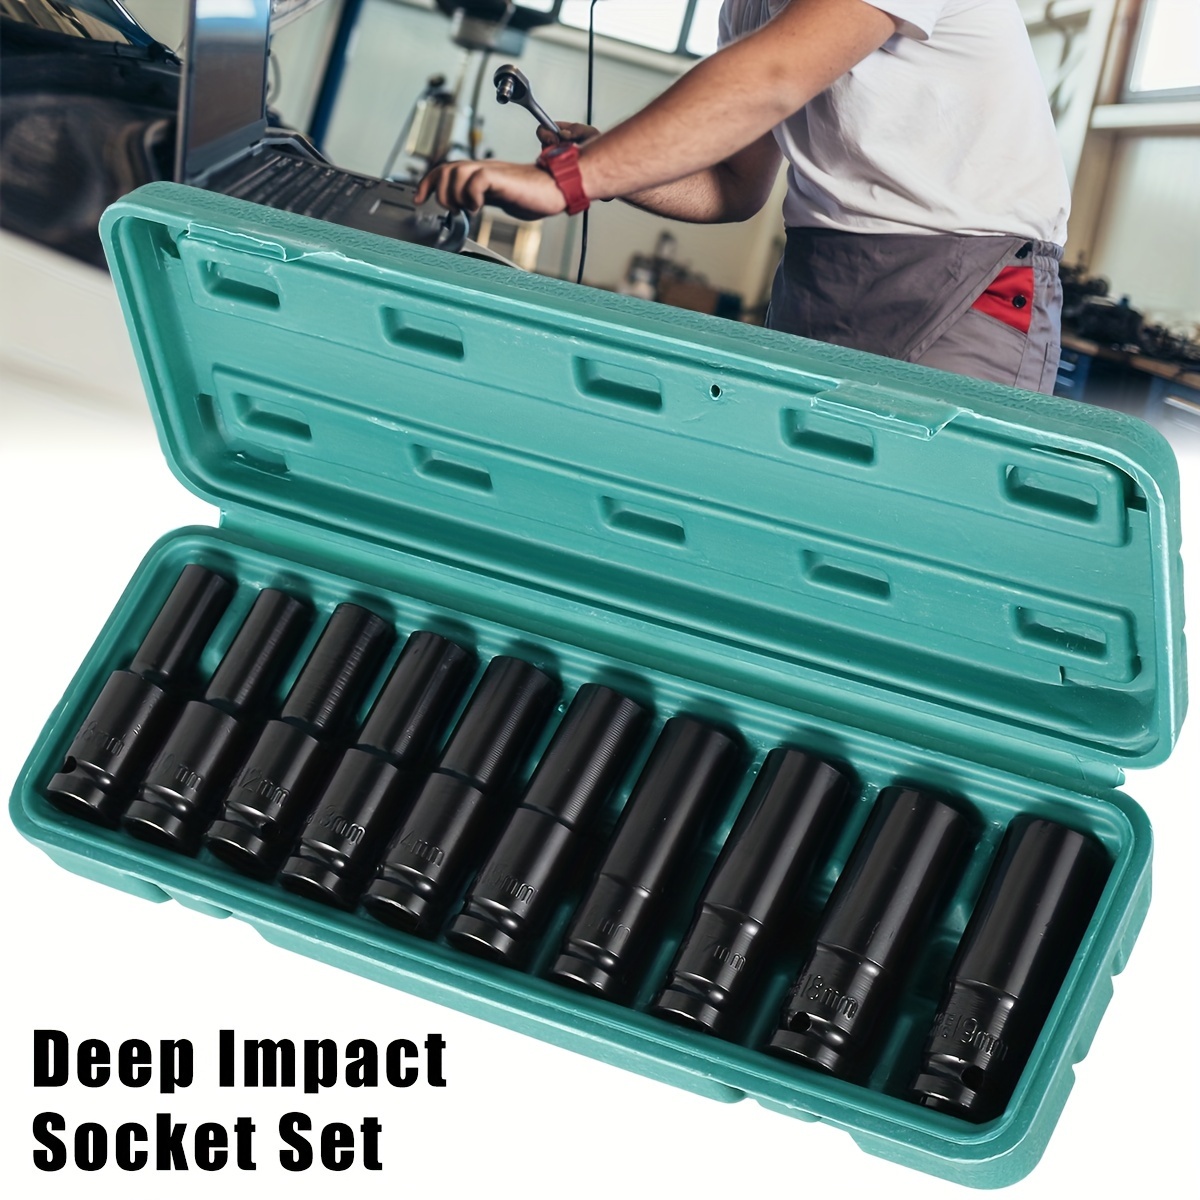 

10pcs Deep Impact Socket Set Drive Metric Wrench Socket 8 To 19mm Heavy Duty Pneumatic Wrench Tire Removal Tools Wear-resistant Portable Impact Socket For Truck Garage Repair